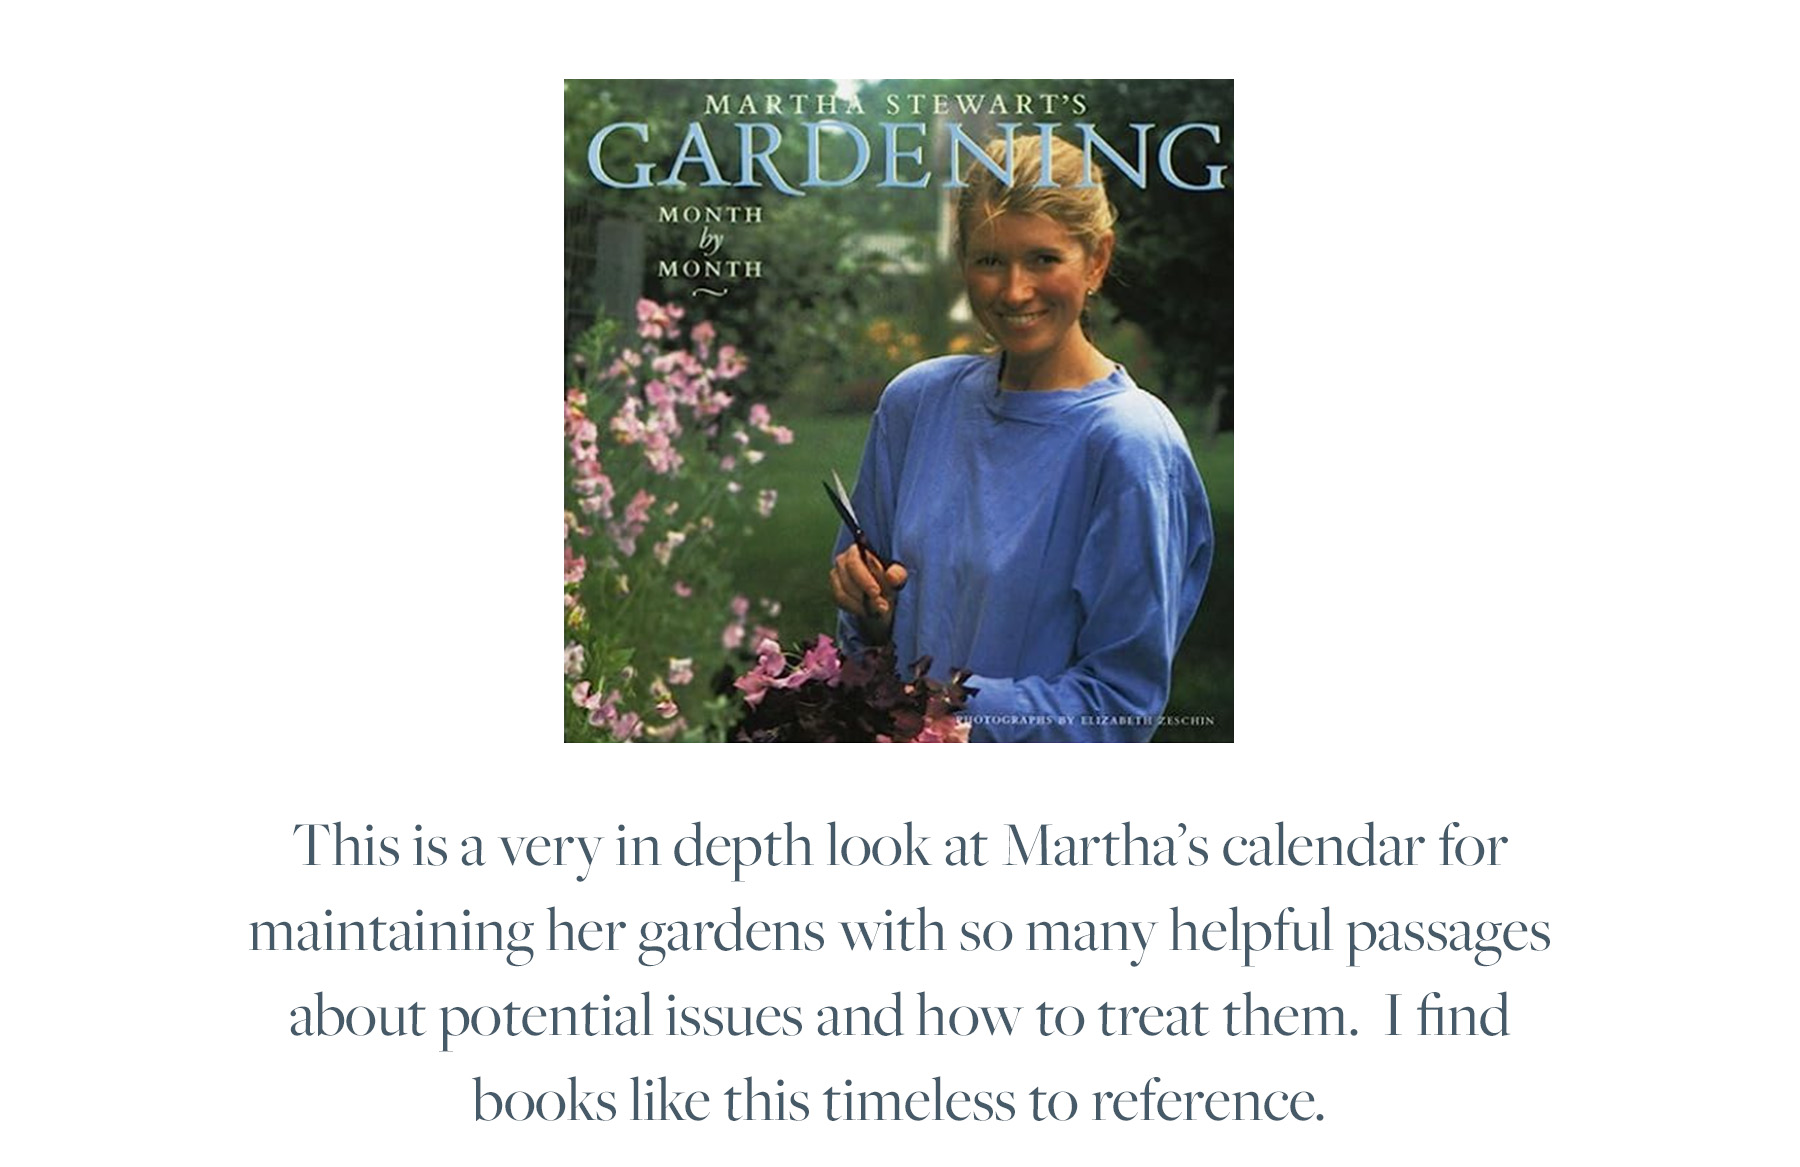 This is a very in depth look at Martha’s calendar for maintaining her gardens with so many helpful passages about potential issues and how to treat them. I find books like this timeless to reference. 